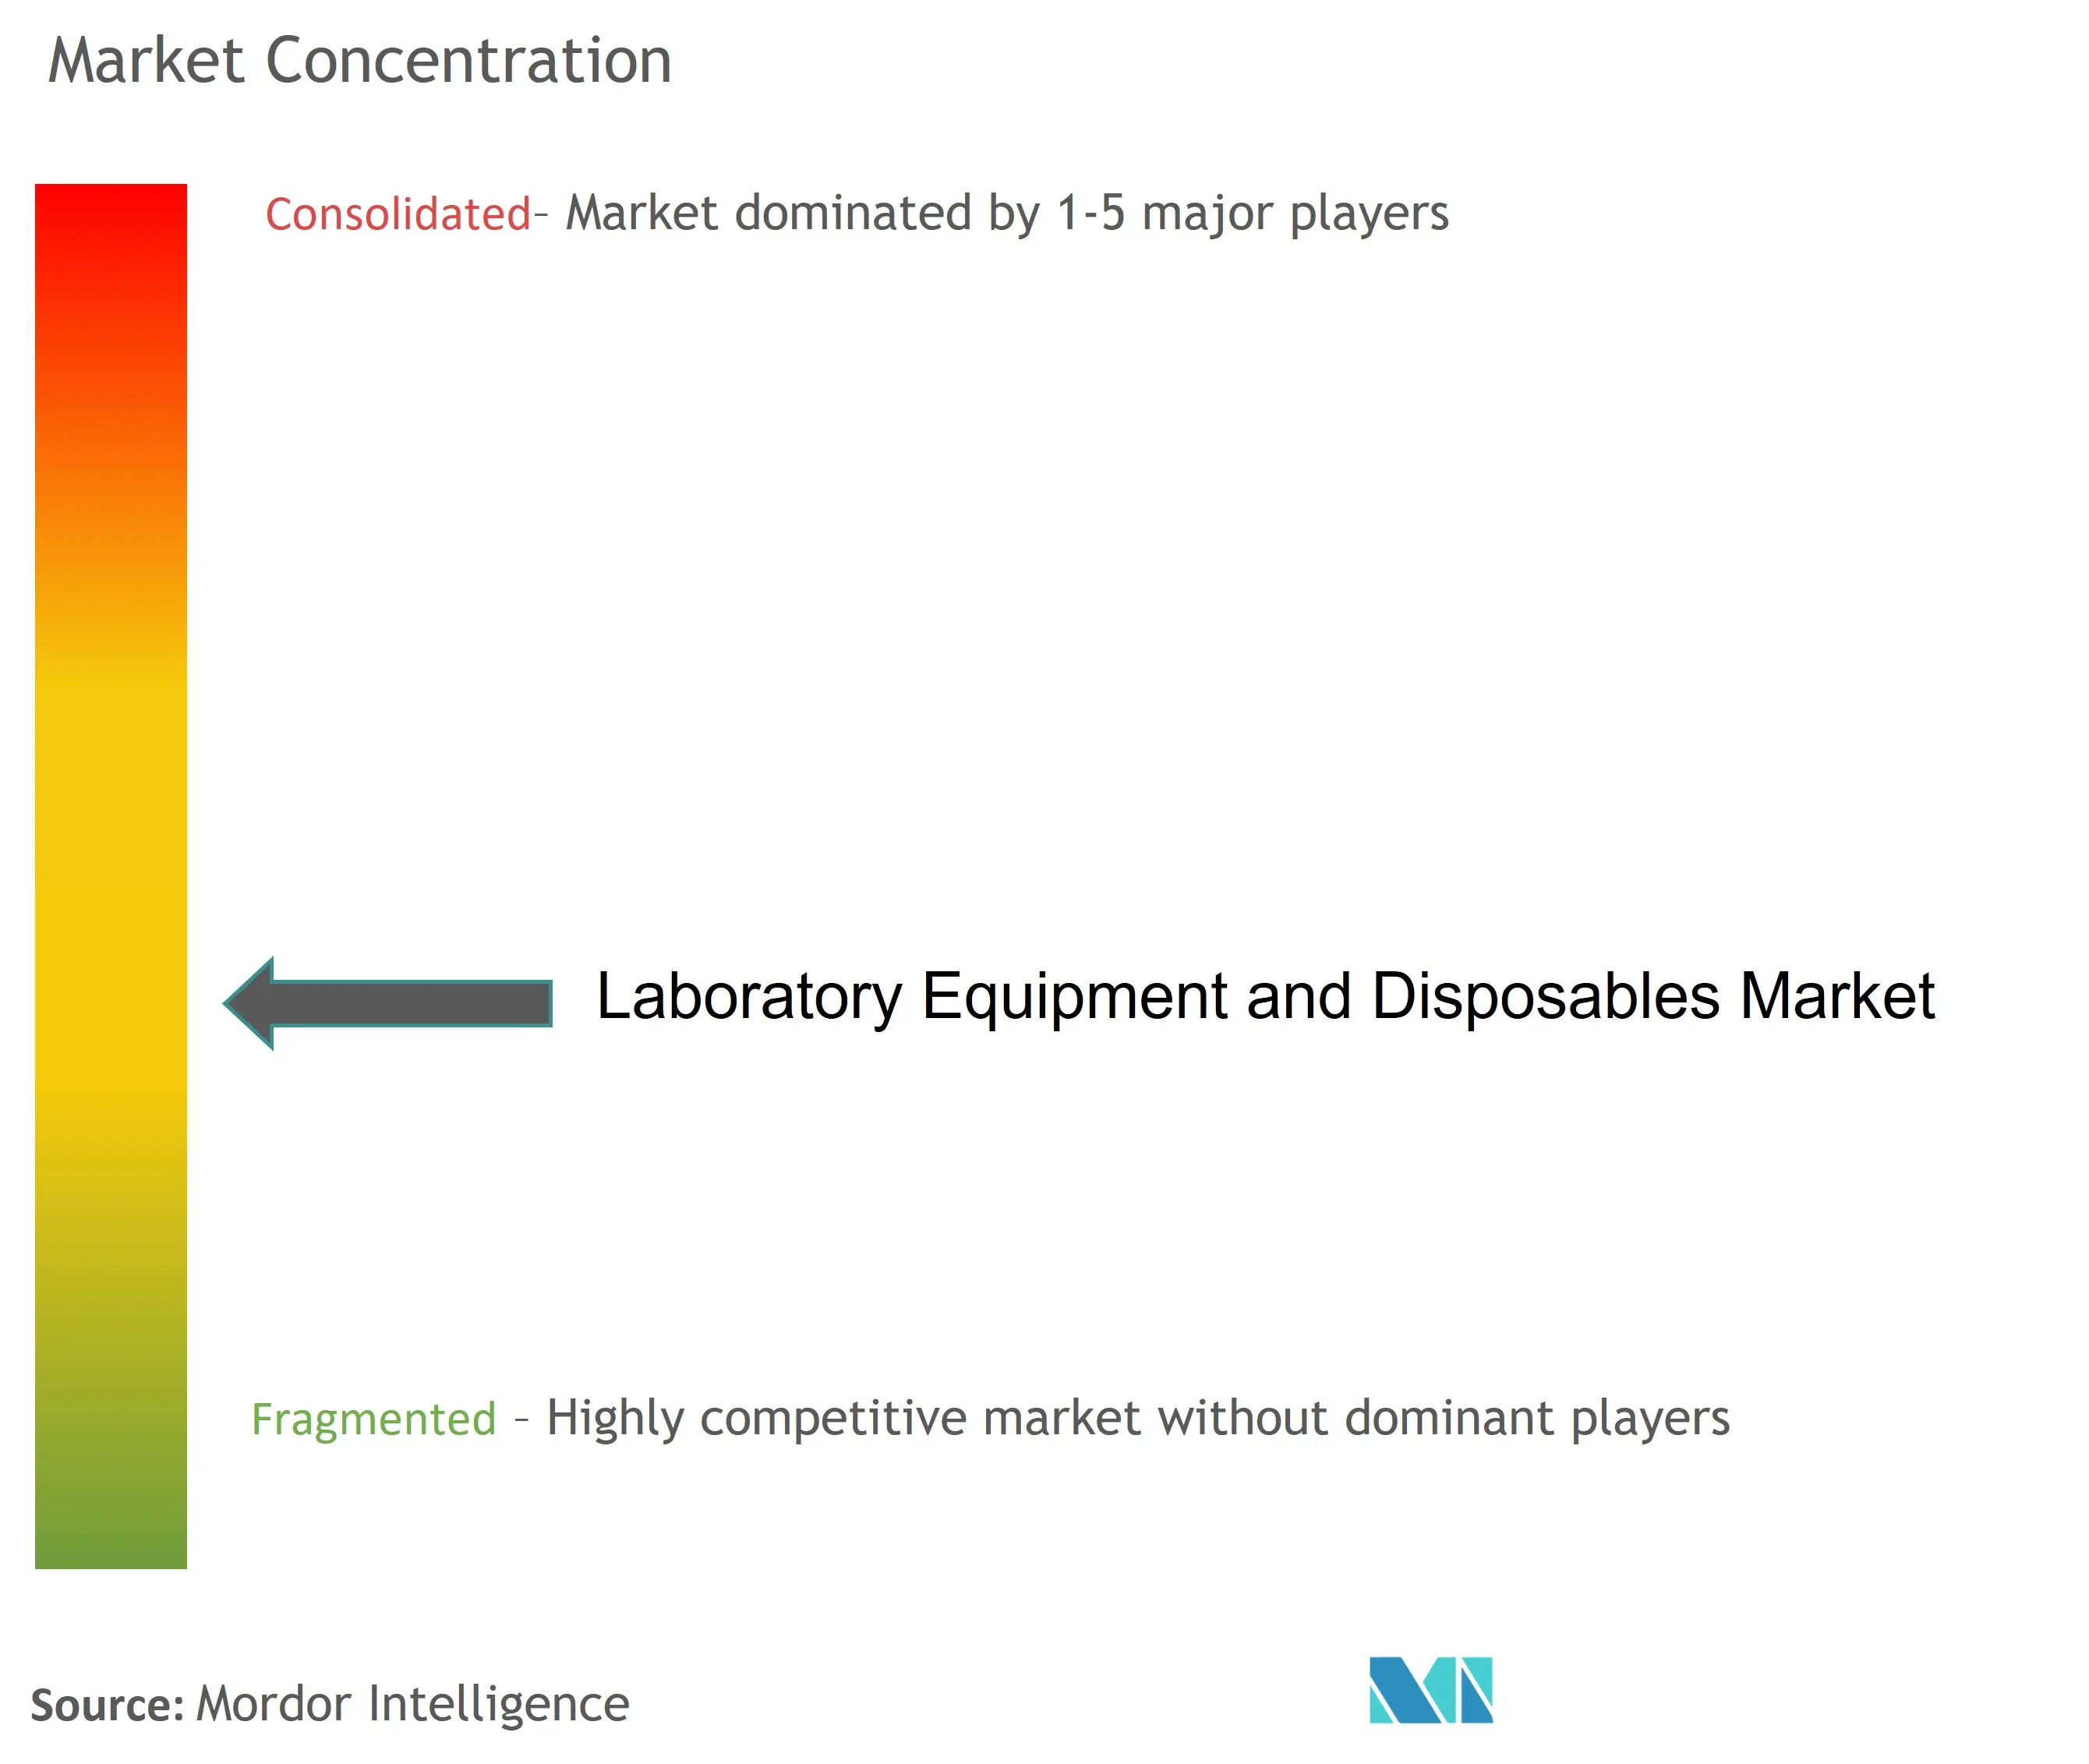 Global Laboratory Equipment and Disposables Market Concentration